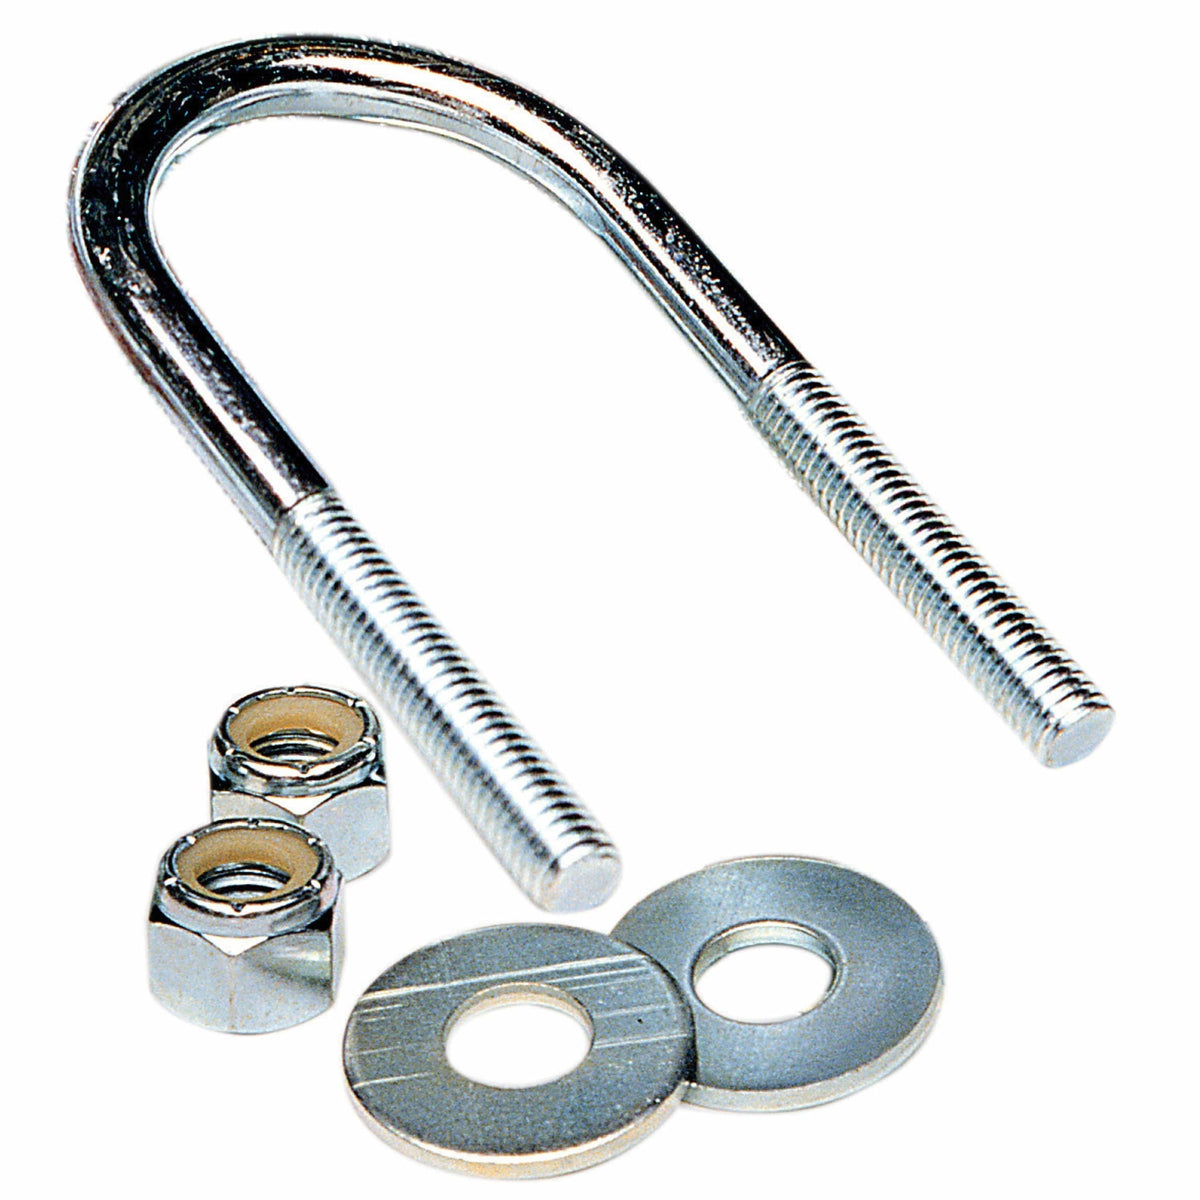 Tie Down Engineering Qualifies for Free Shipping Tie Down U-Bolt Square Pair Zinc Plated 3/8-16" 3-1/8" 4 1-3/4" #86830